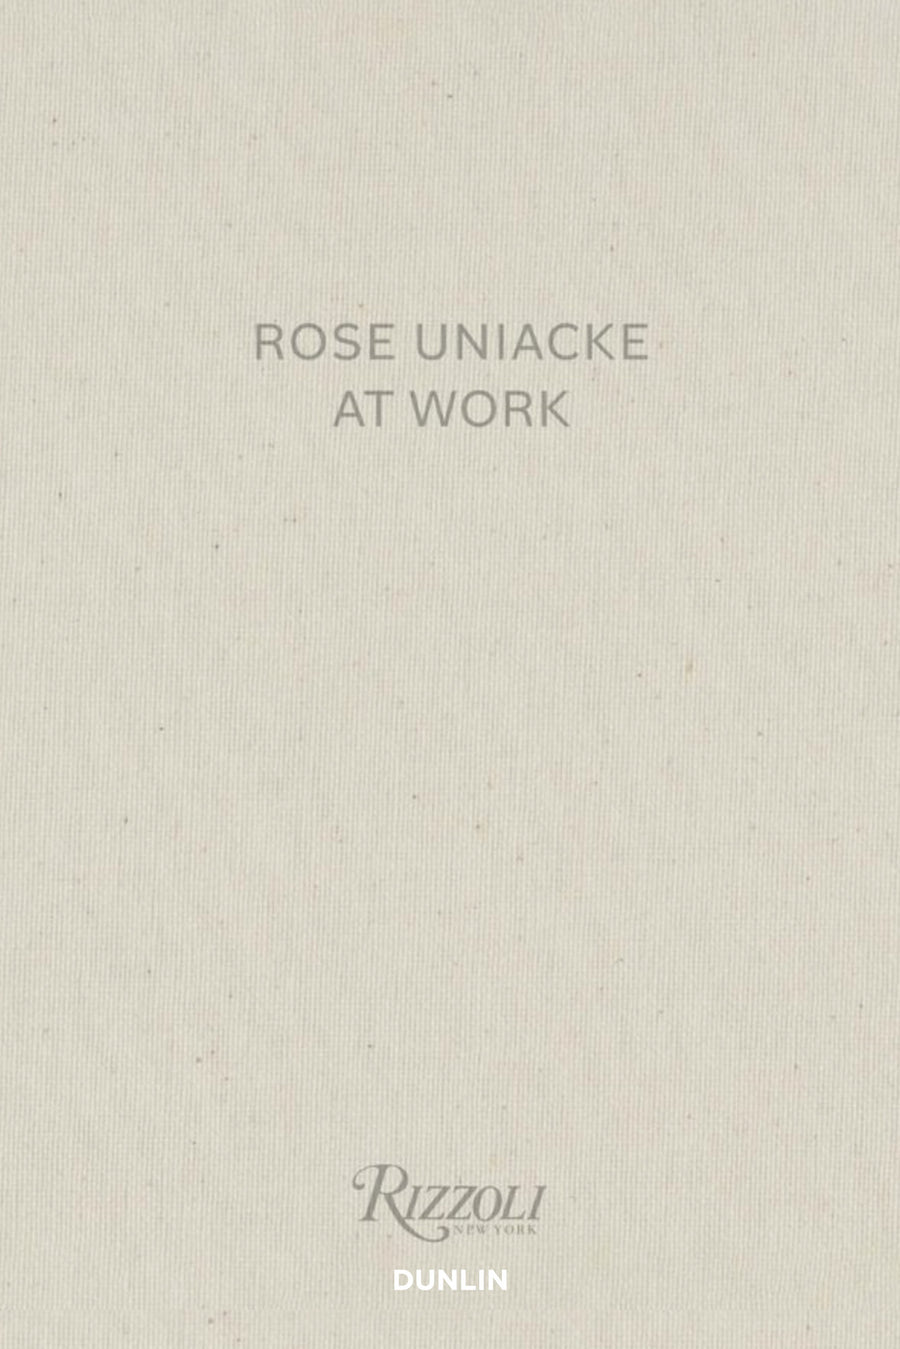 Signed Copy - Rose Uniacke at Work